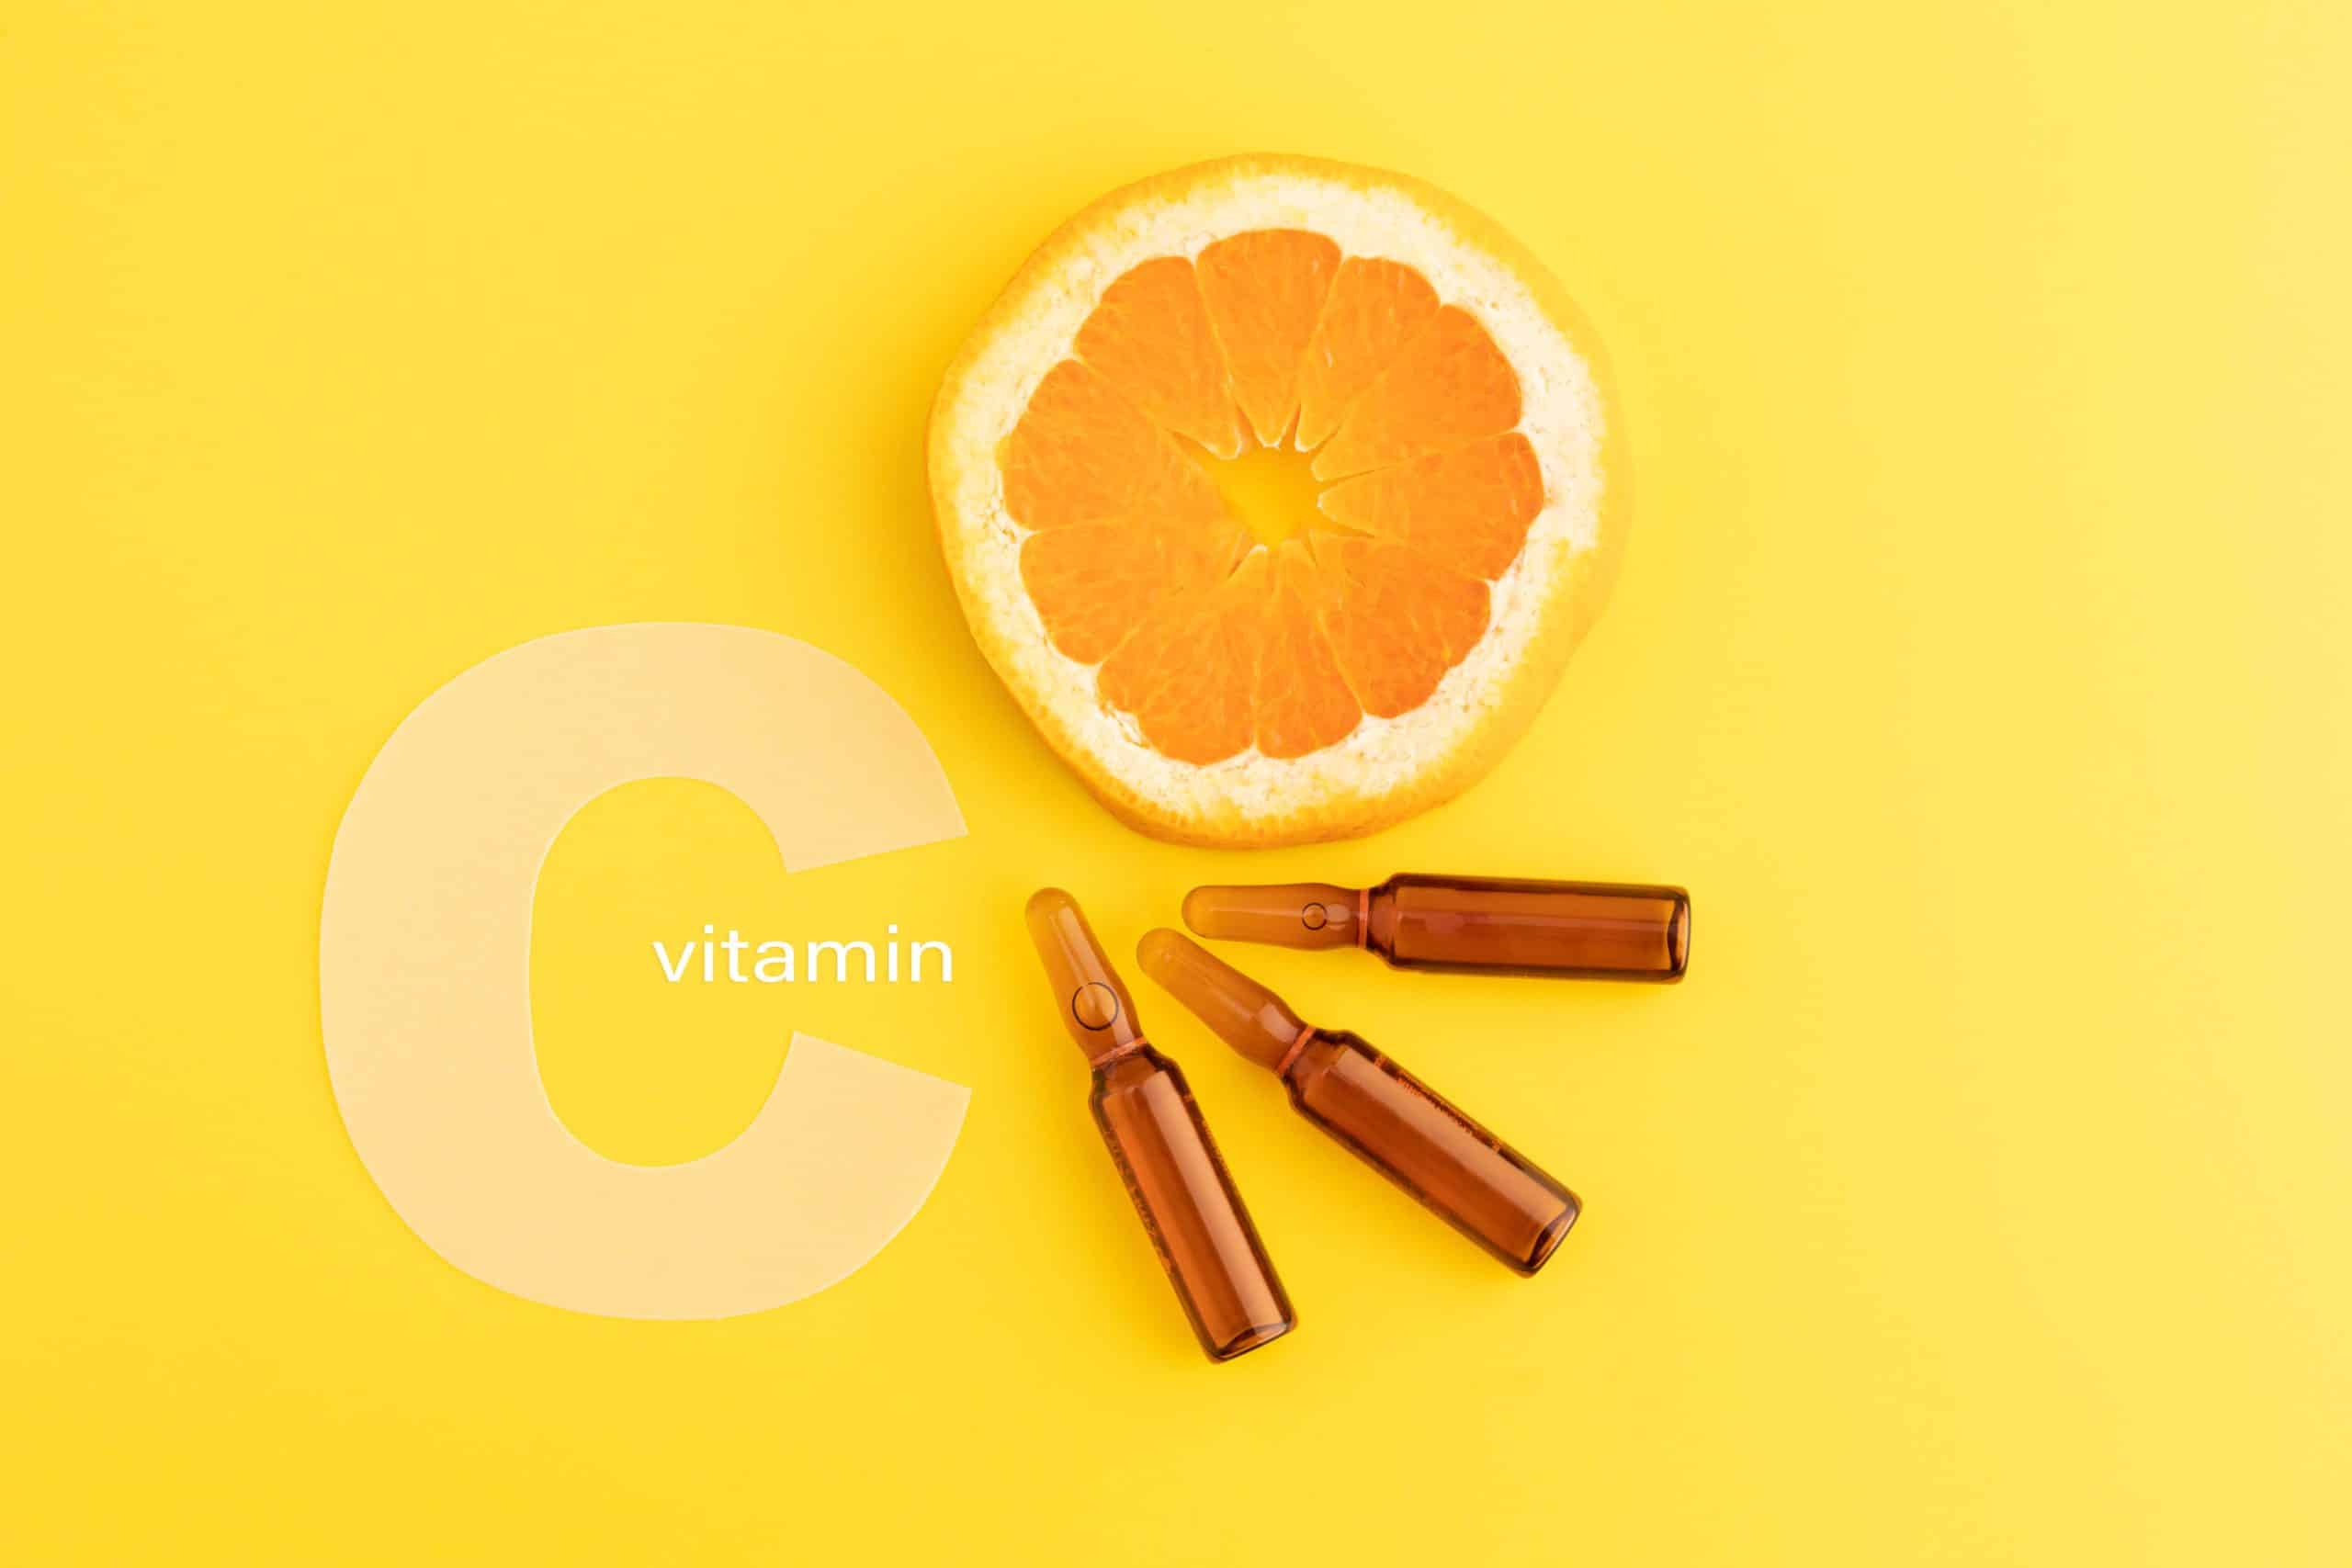 Vitamin C and its significance